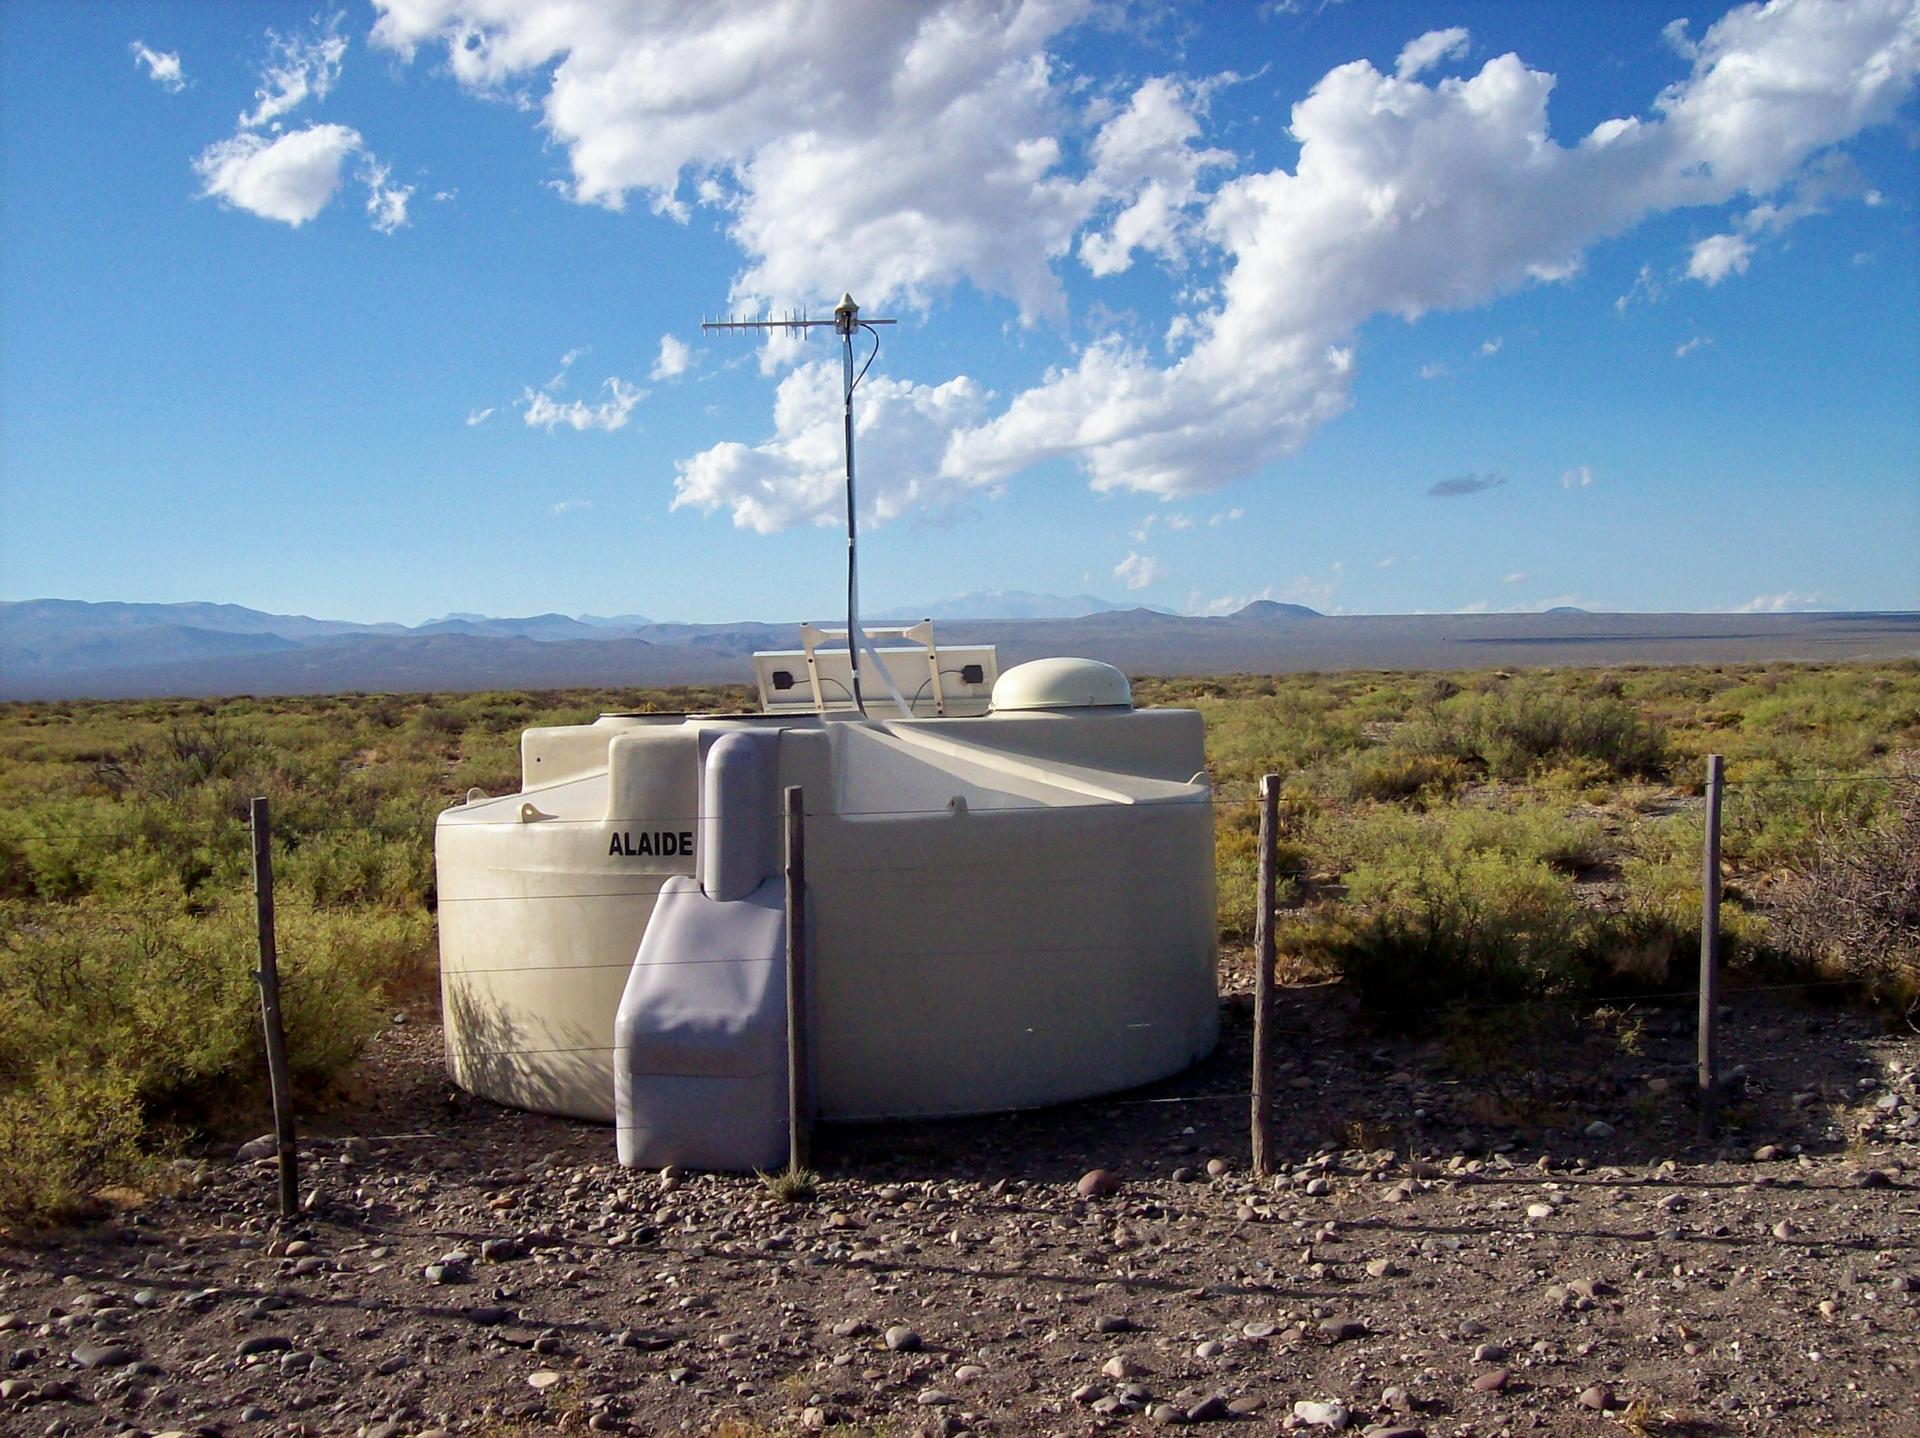 One of many surface detectors that comprise the Pierre Auger Observatory at the foot of the Andes in Argentina. Without proper maintenance, these detectors are slowly winking off, compromising the collection of cosmic rays.